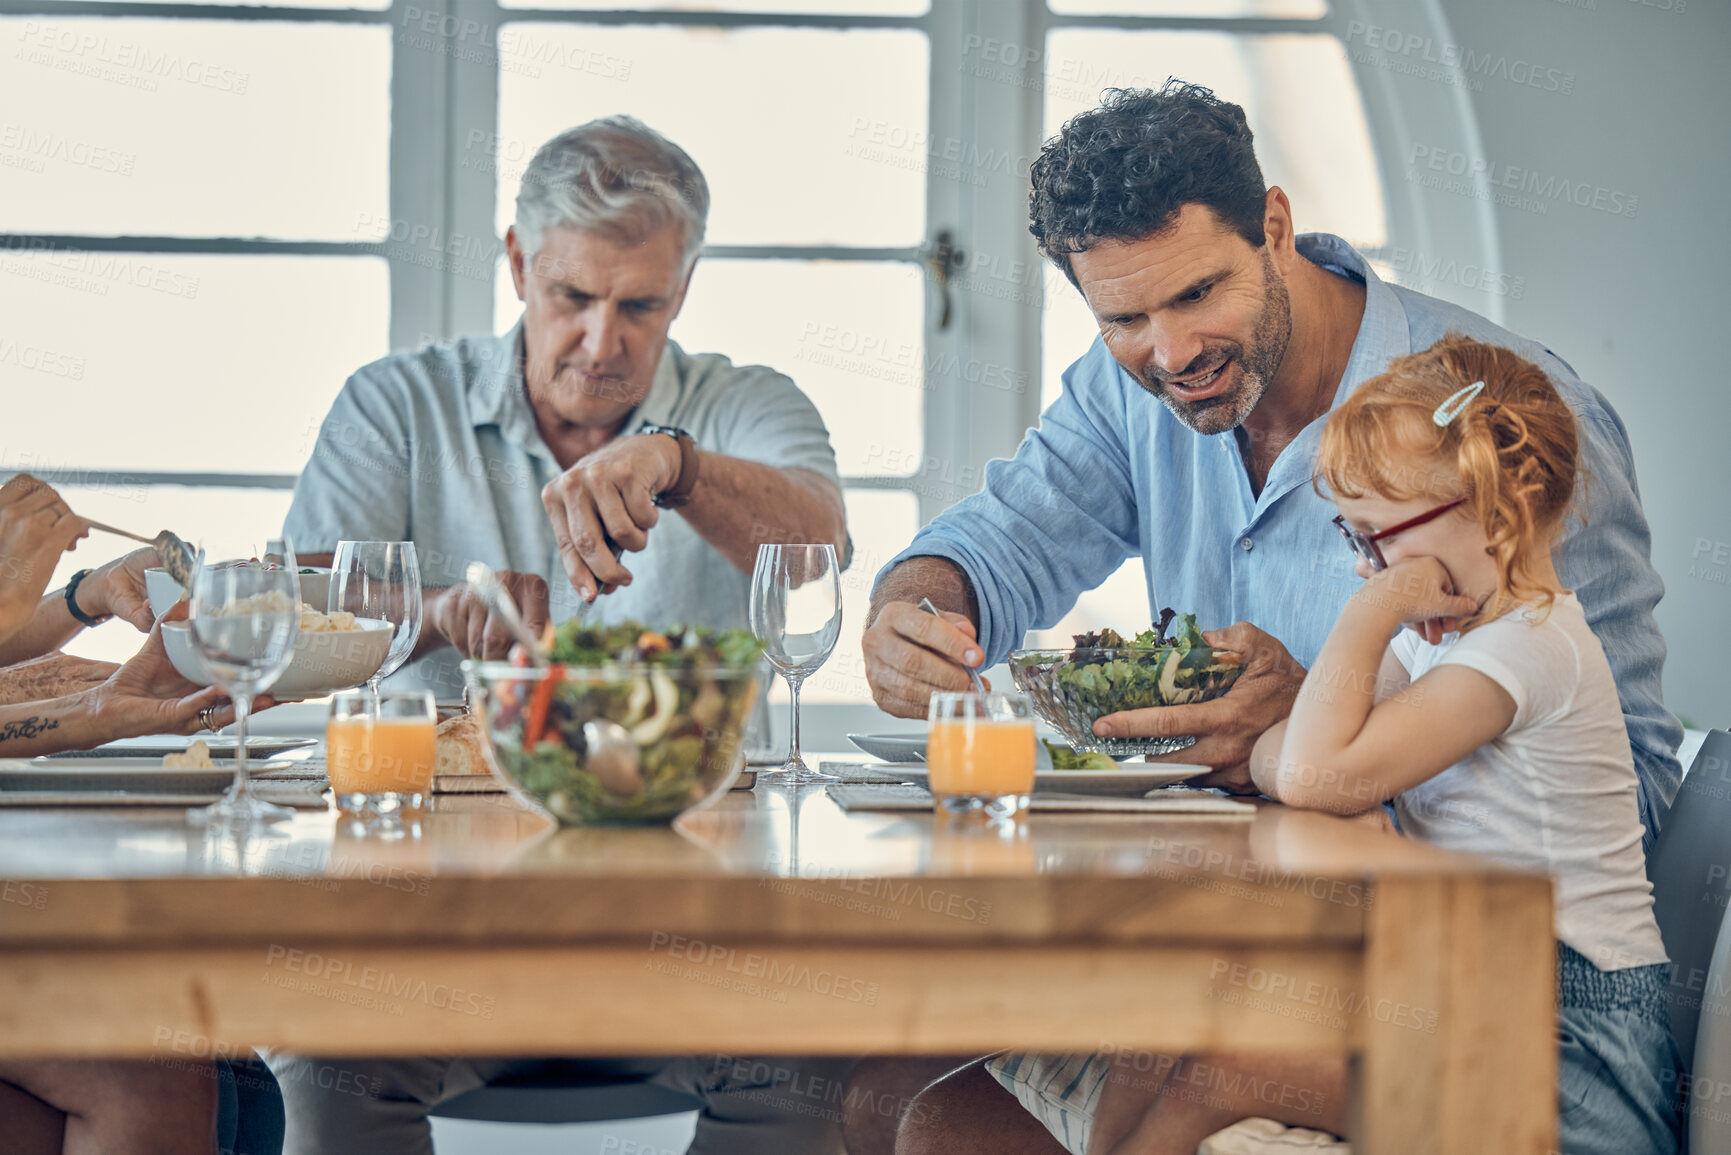 Buy stock photo Dinner, family and child eating food at dining room table together at retirement home. Senior grandparent, happy father and young girl upset about conversation or dad teaching child healthy lifestyle